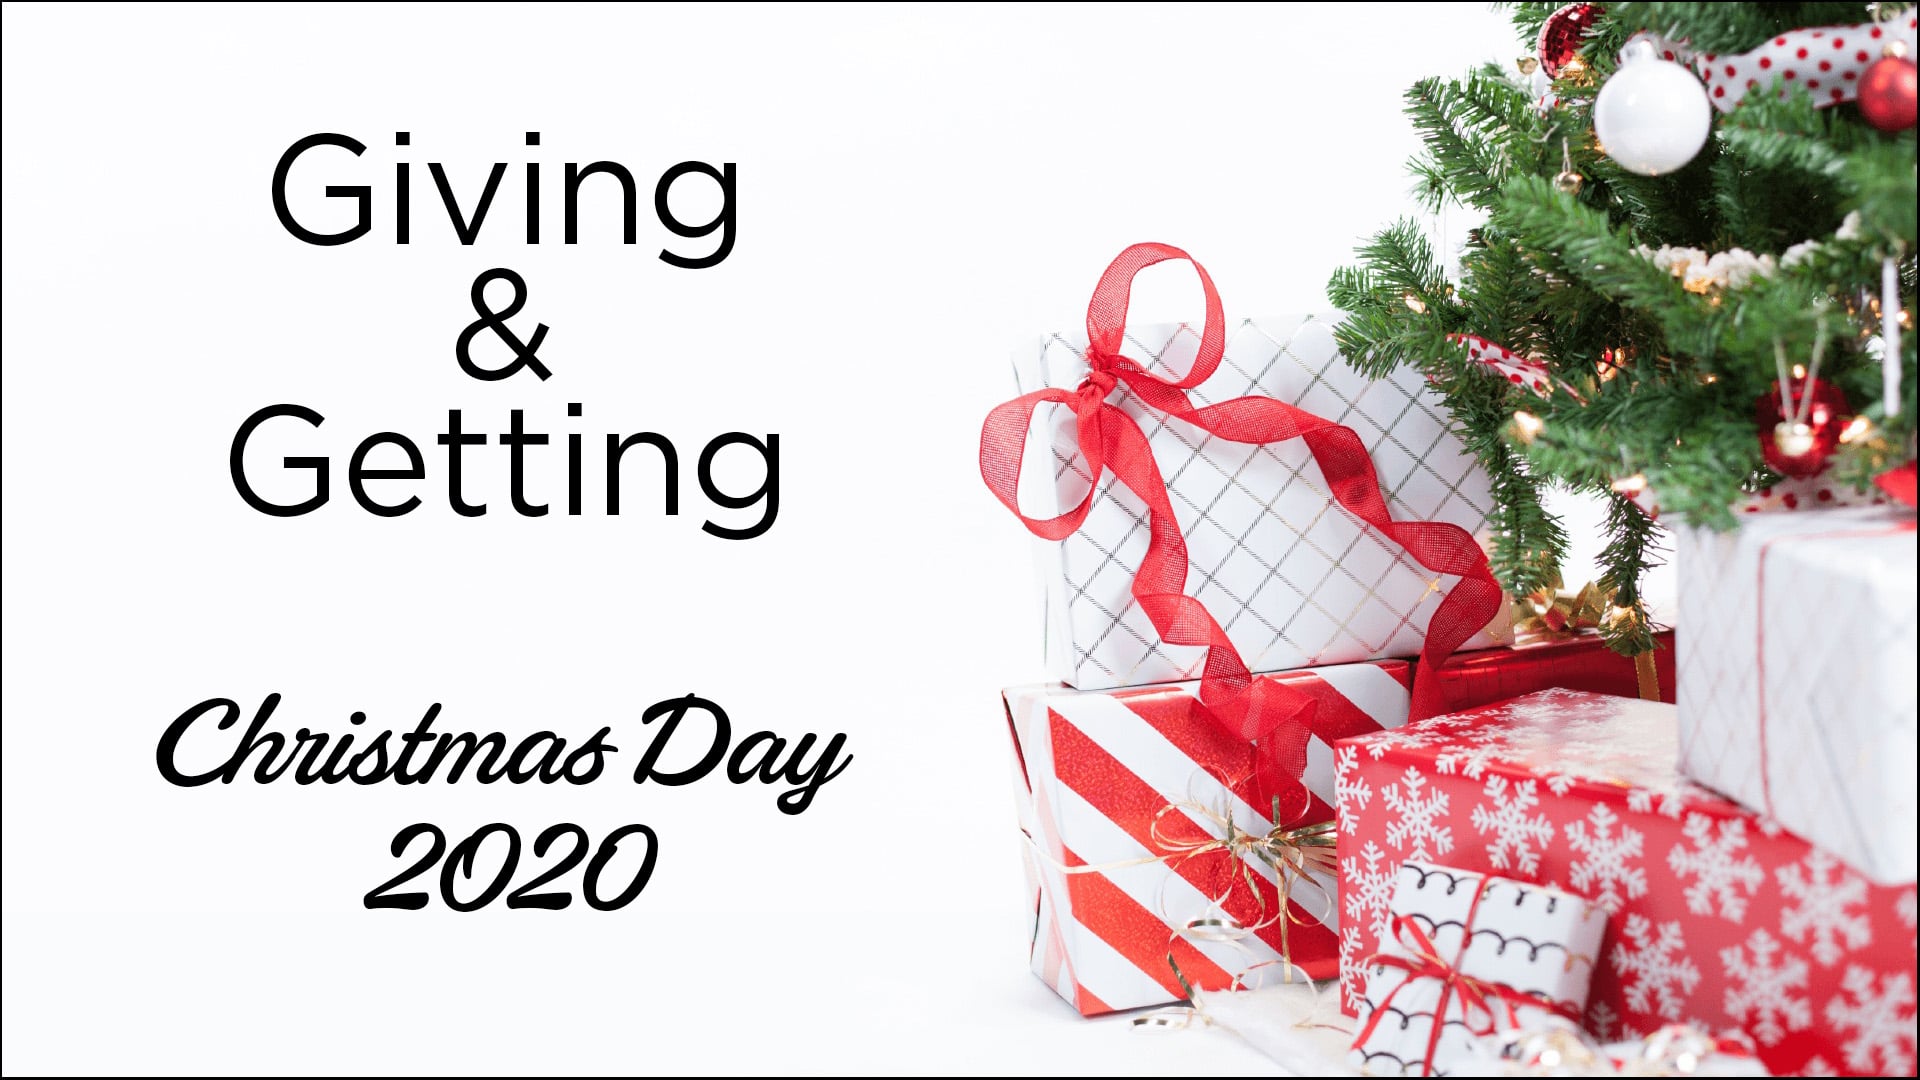 Christmas Day Service 2020